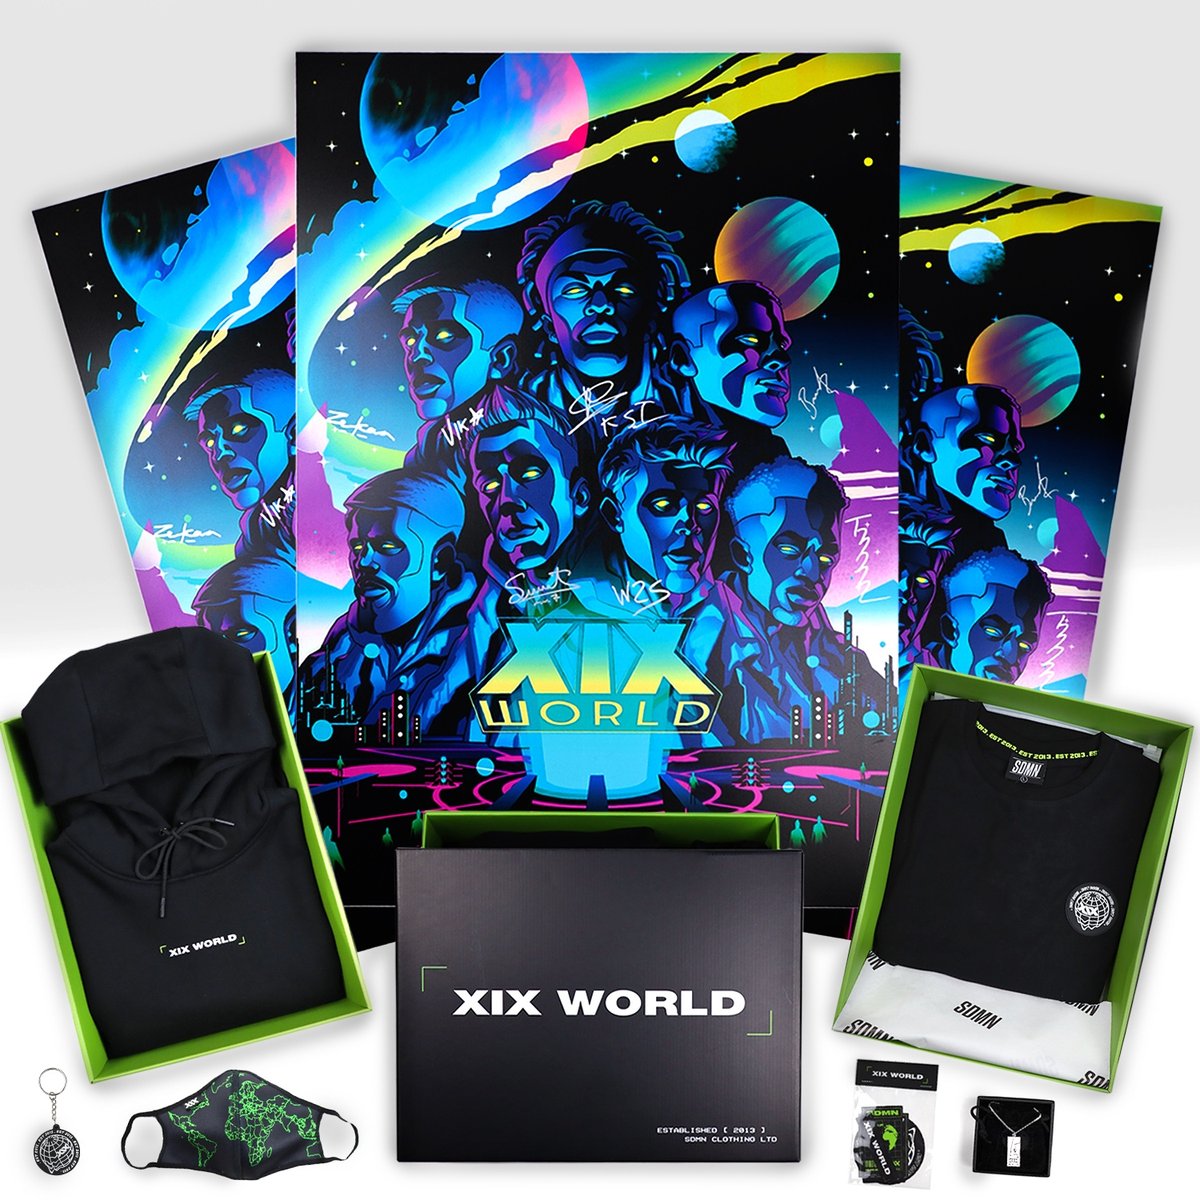 ❎ COMPETITION TIME ❎ Here we goooo! We have these signed XIX WORLD posters AND gift boxes packed with brand new XIX WORLD merch up for grabs!! To enter all you need to do is RT this tweet and then reply below using the hashtag #XIXWORLD ⤵️ Winners will be announced Friday.